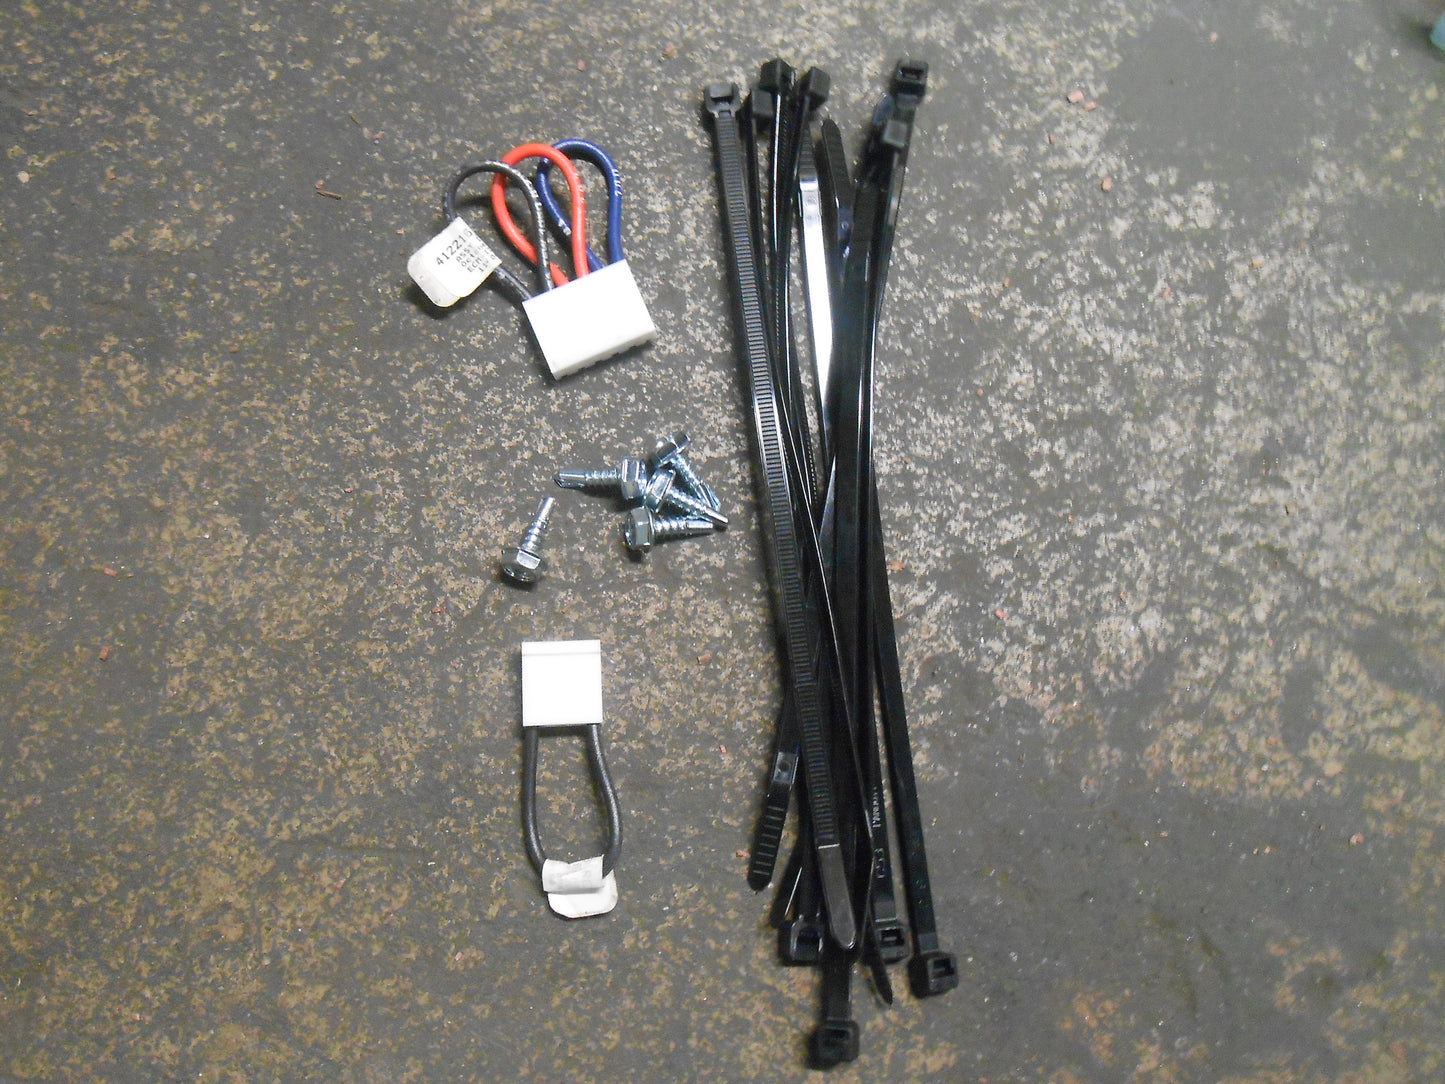 IGNITION CONTROL REPLACEMENT KIT